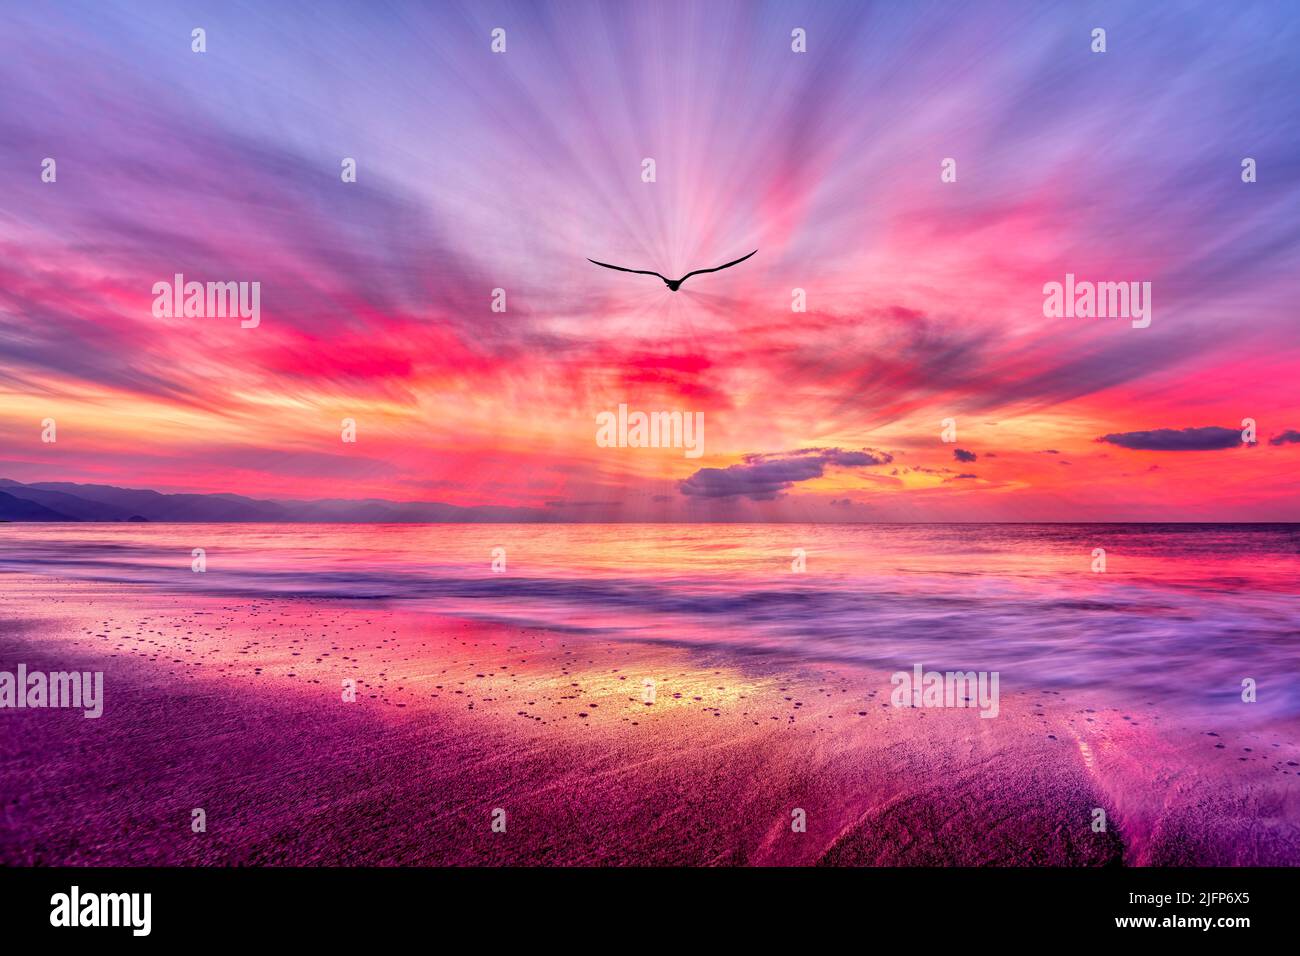 Ocean Landscape Sunset With A Bird Flying Towards A Colorful Romantic Sky In A High Resolution Image Stock Photo